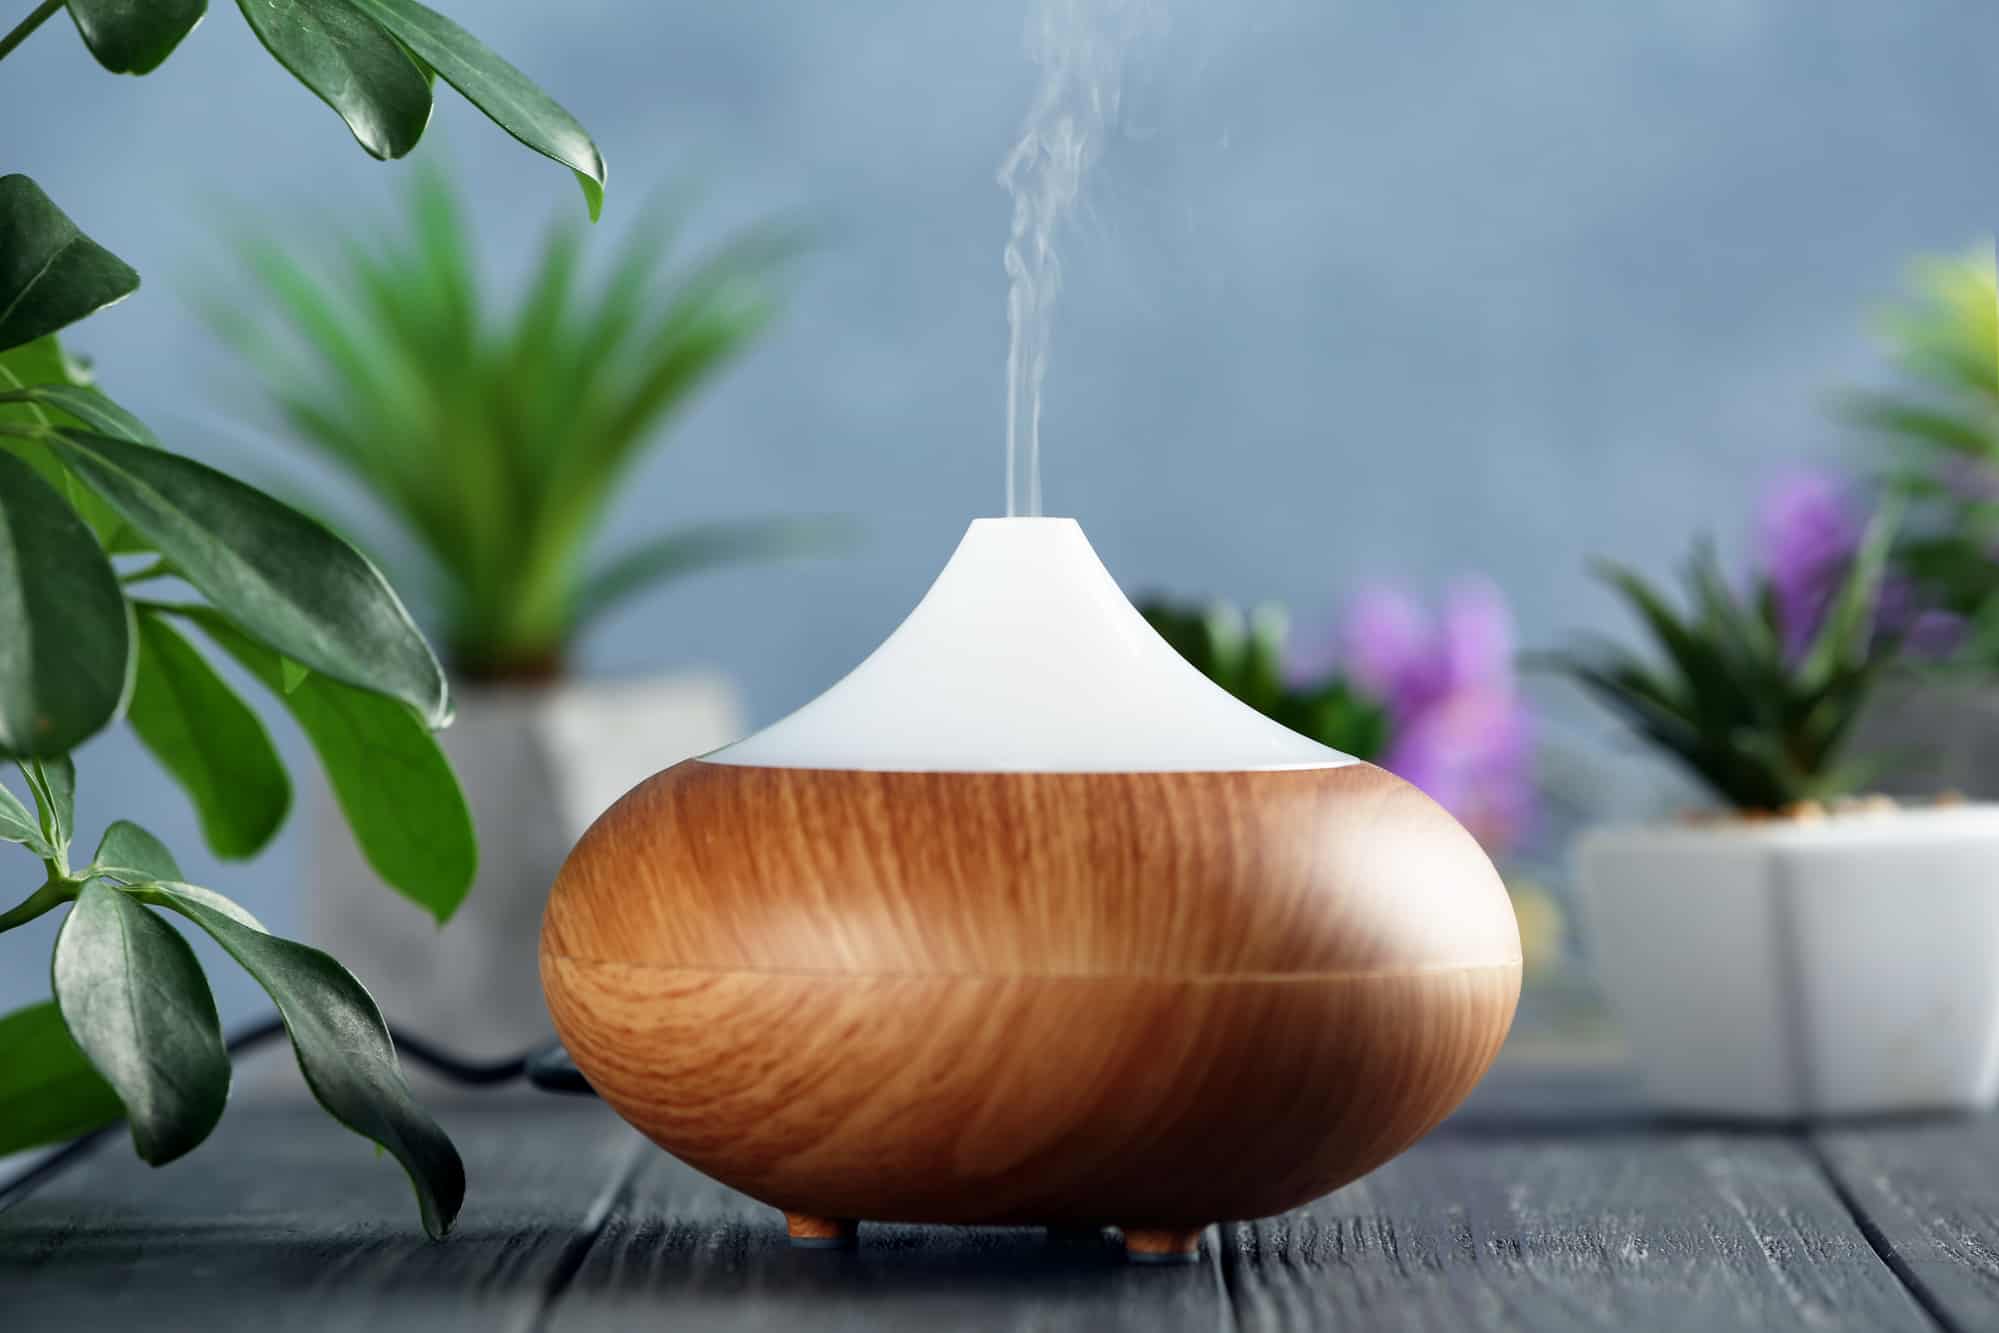 10 Best Essential Oil Diffusers In Canada 2021 - Review & Guide